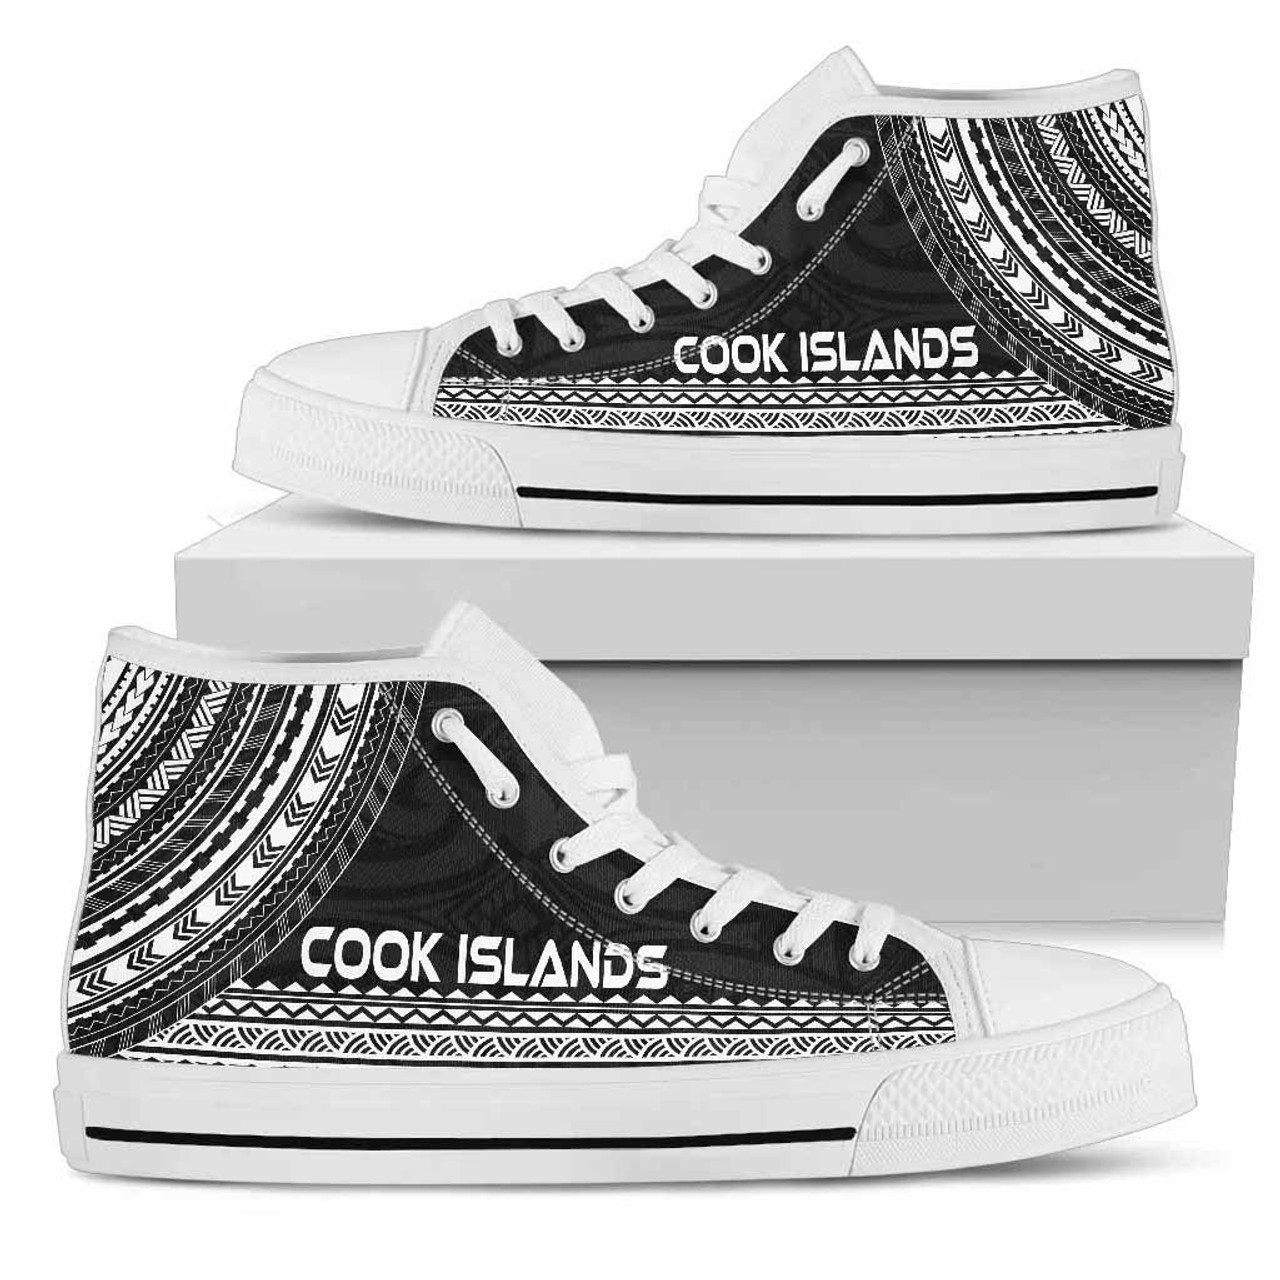 Cook Islands High Top Shoes - Polynesian Black Chief Version 3